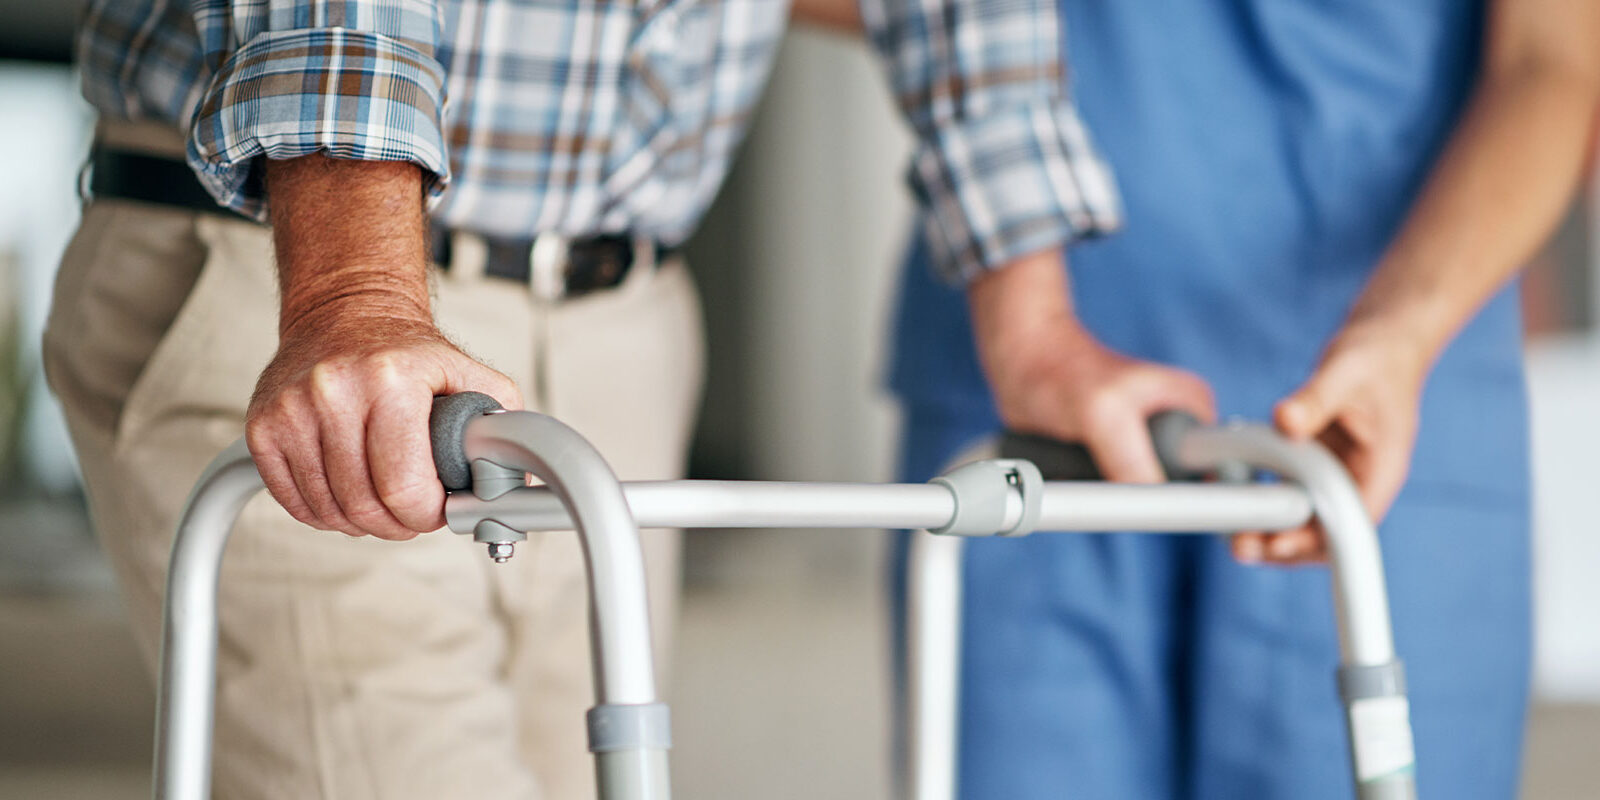 Home Safety For Seniors: A Fall-Proof Guide For Landlords and Tenants